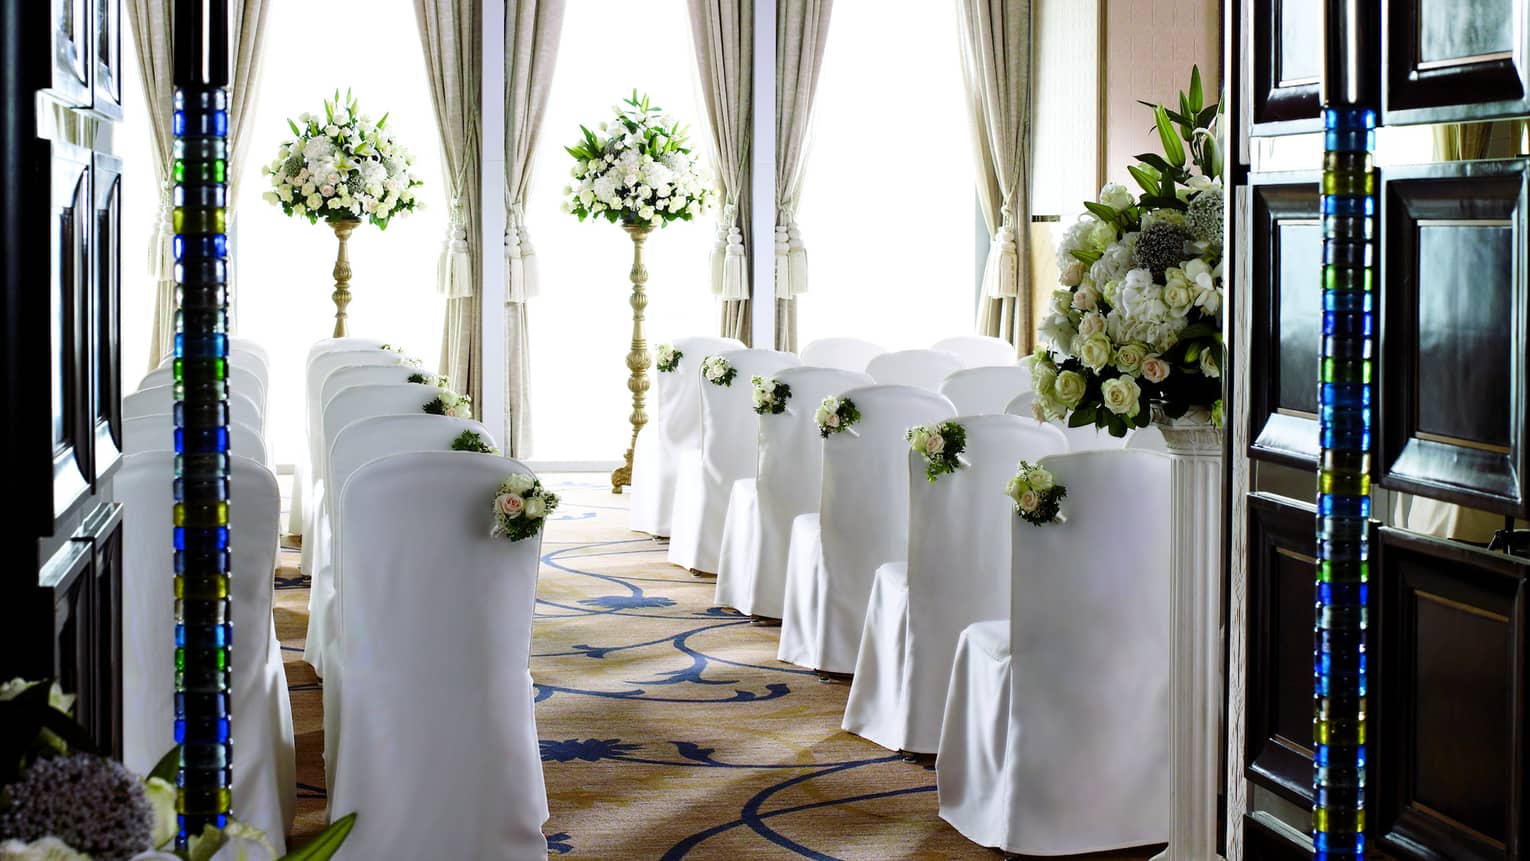 Ballroom wedding ceremony, rows of chairs with white linens face sunny window